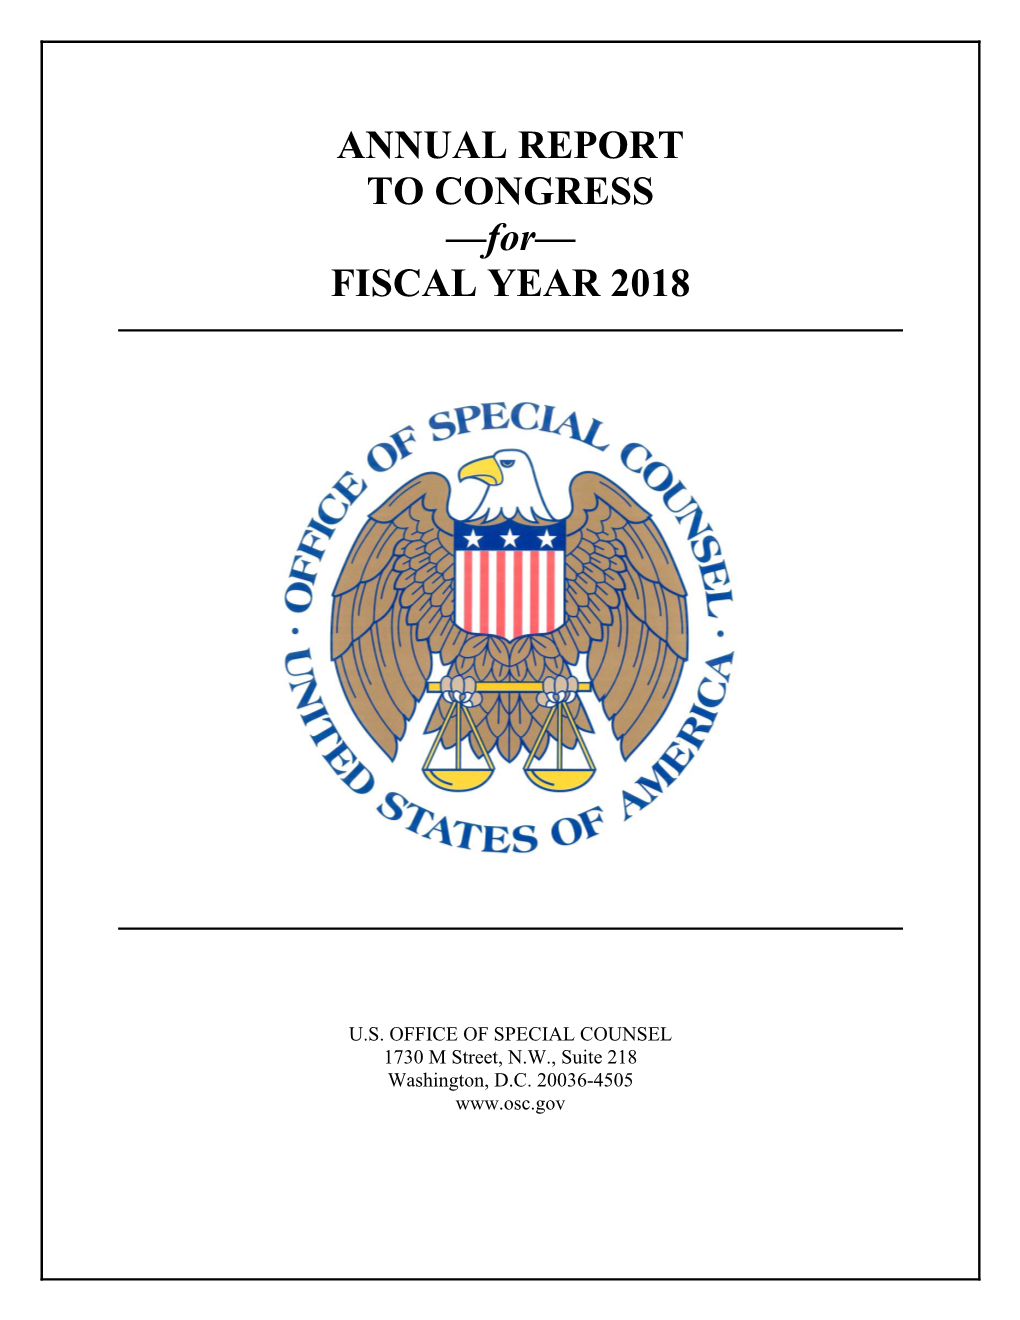 ANNUAL REPORT to CONGRESS —For— FISCAL YEAR 2018